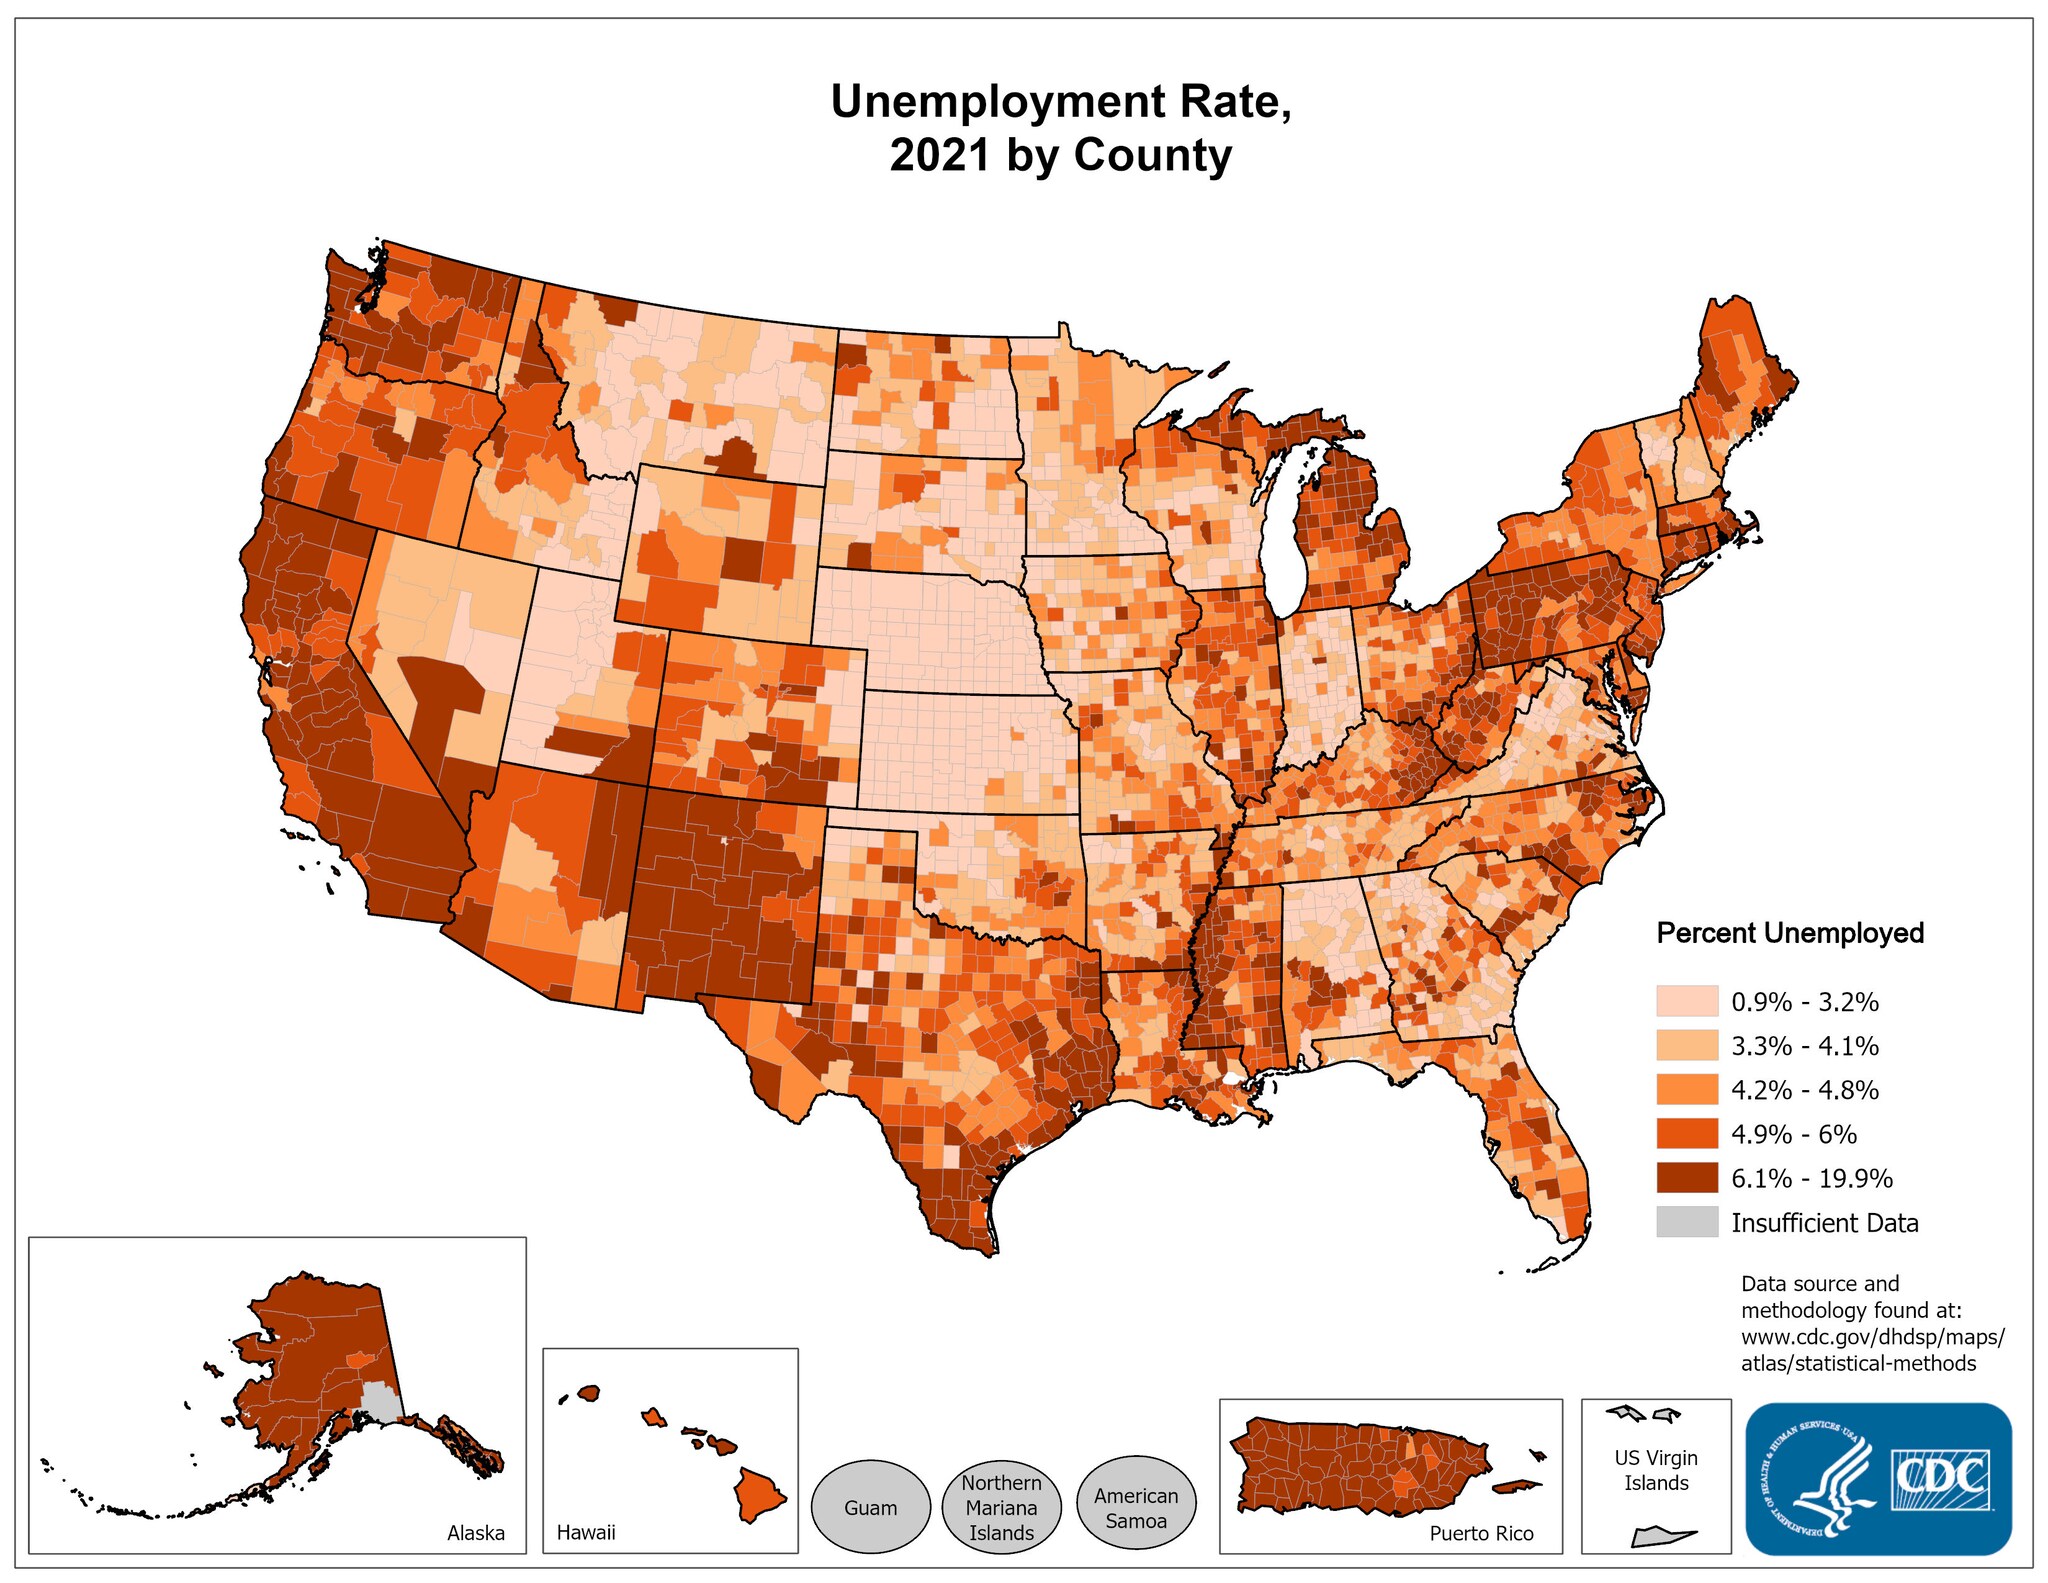 Unemployment Rate by County 2015. Counties with the highest unemployment rates in 2015 were scattered throughout northern Michigan, Alaska, the West Coast, the Mississippi Delta, eastern Kentucky, and rural Georgia and Alabama. The range in the unemployment rate was between 1.8% and 24.3%.